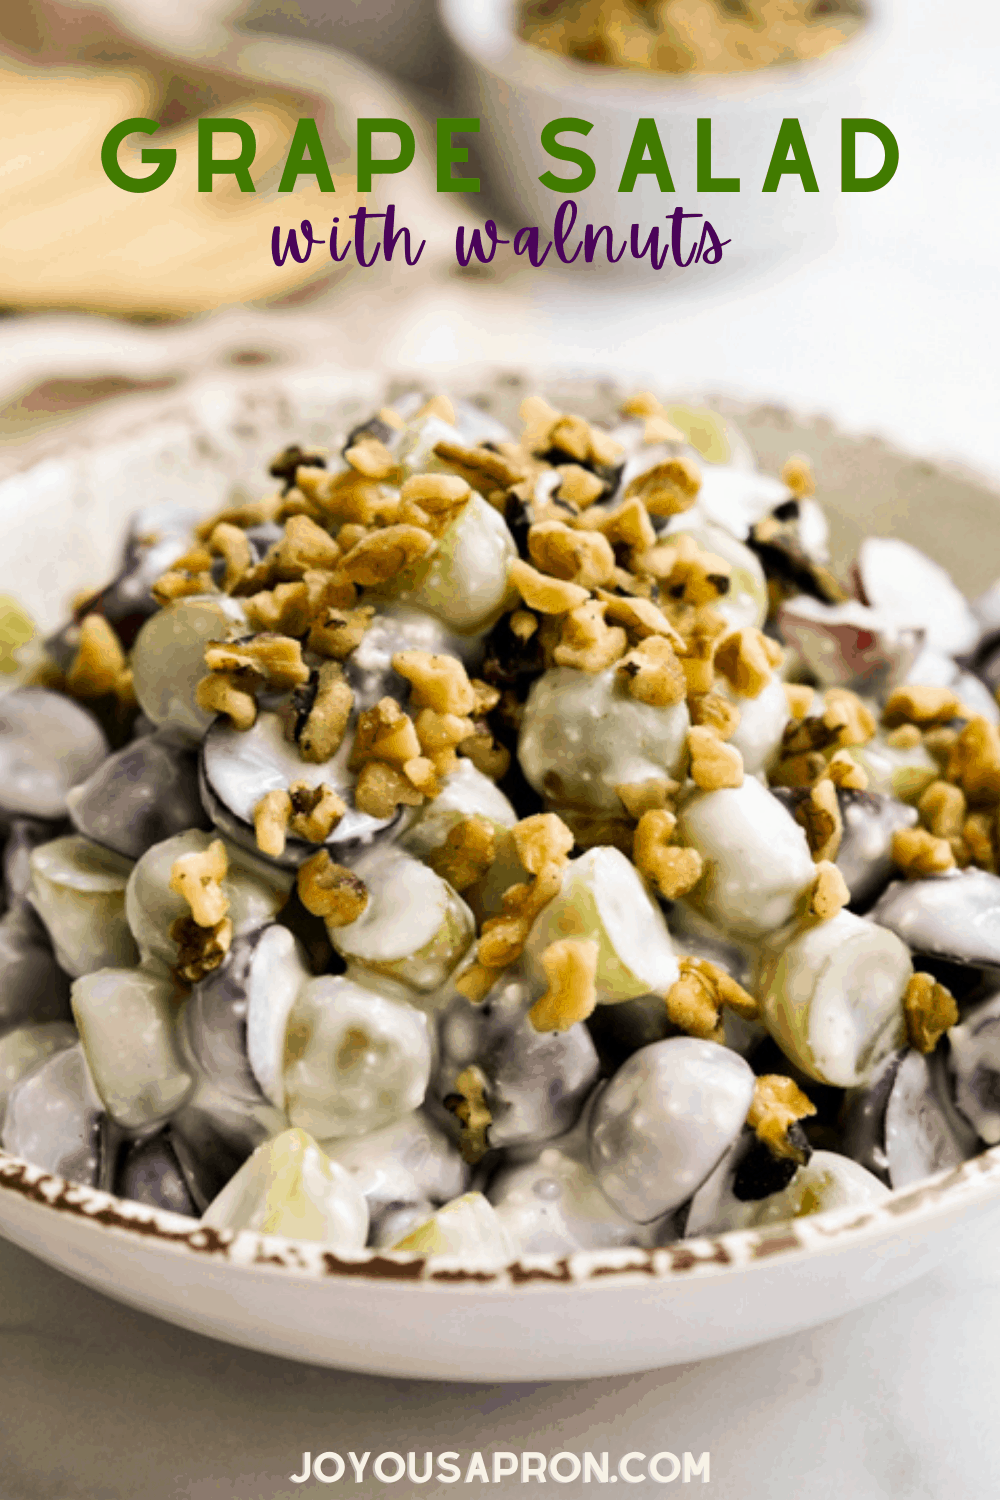 Grape Walnut Salad - easy, healthy and delicious fruit salad side dish for the summer. Red and green grapes tossed with walnuts in a creamy sweet and tangy dressing. Perfect for picnics, cookout and more! via @joyousapron